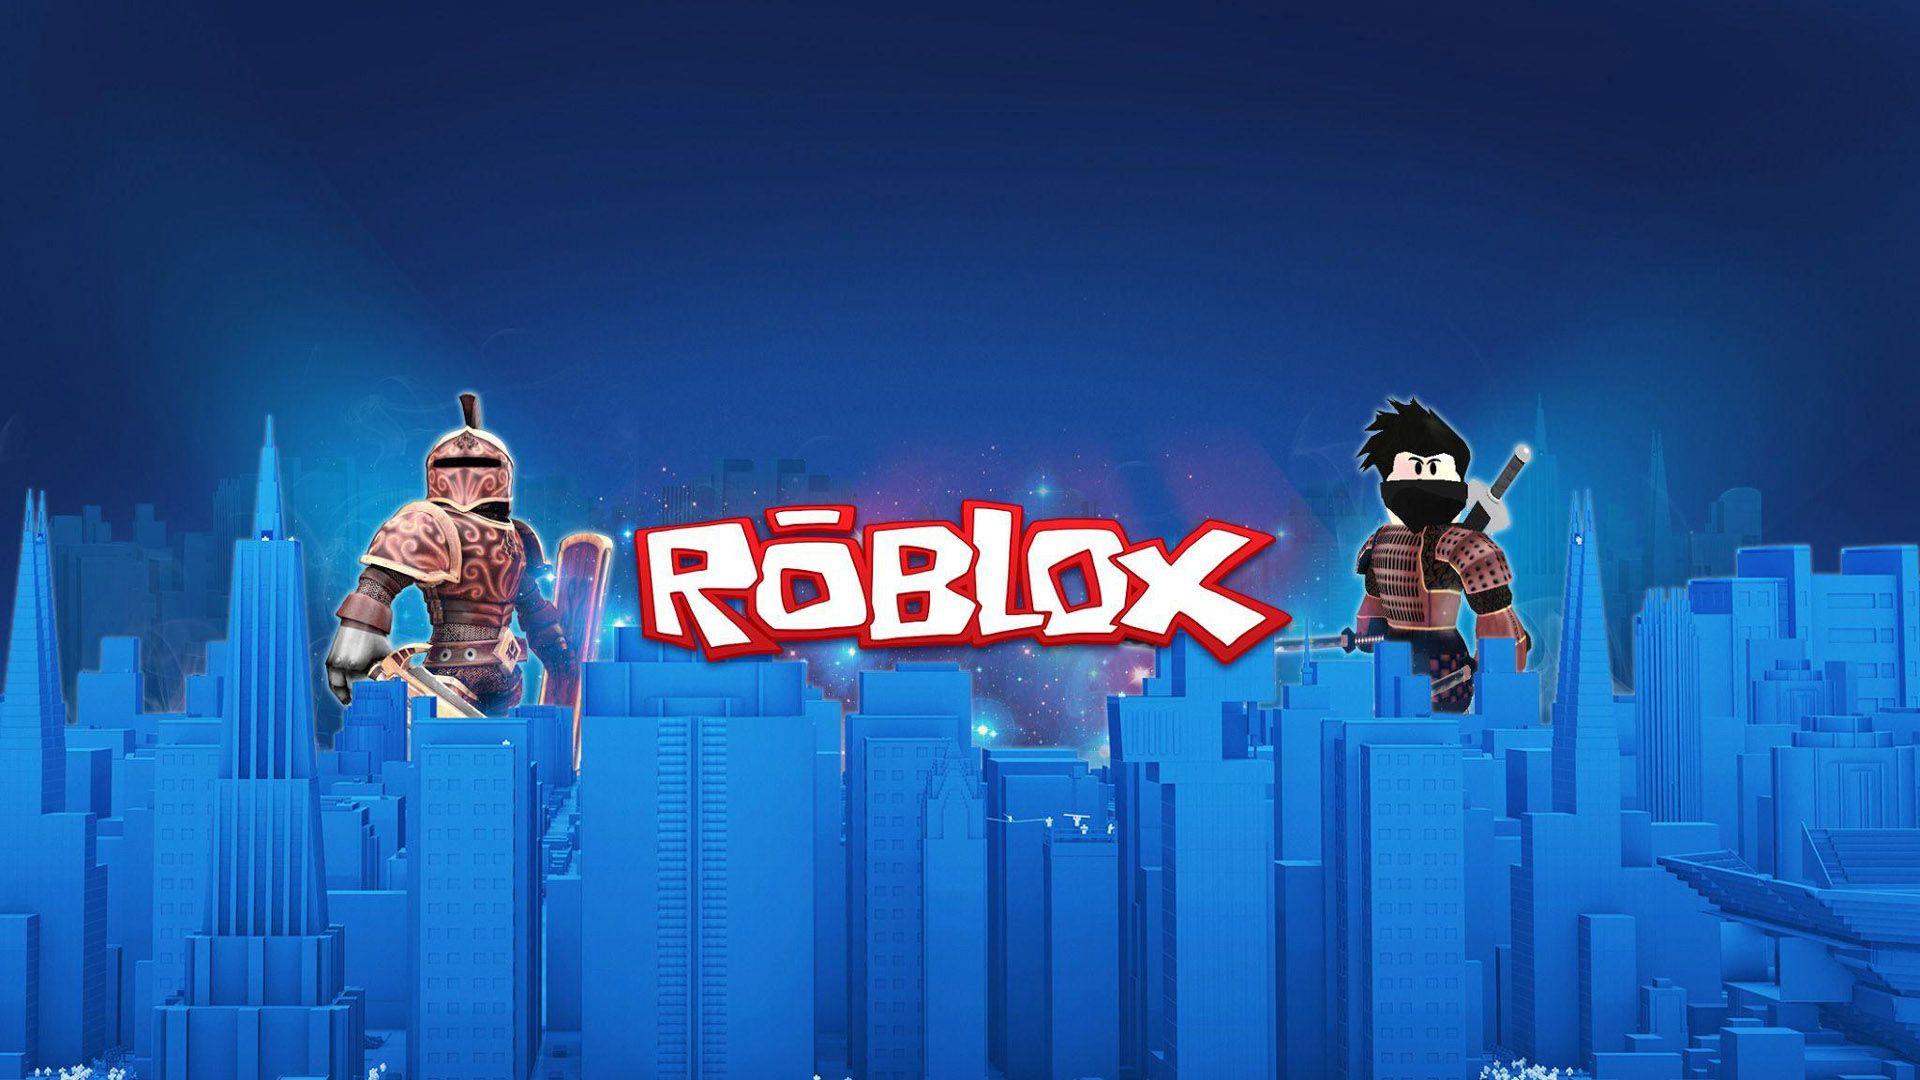 Roblox Blue Wallpapers Top Free Roblox Blue Backgrounds Wallpaperaccess - light blue roblox logo aesthetic